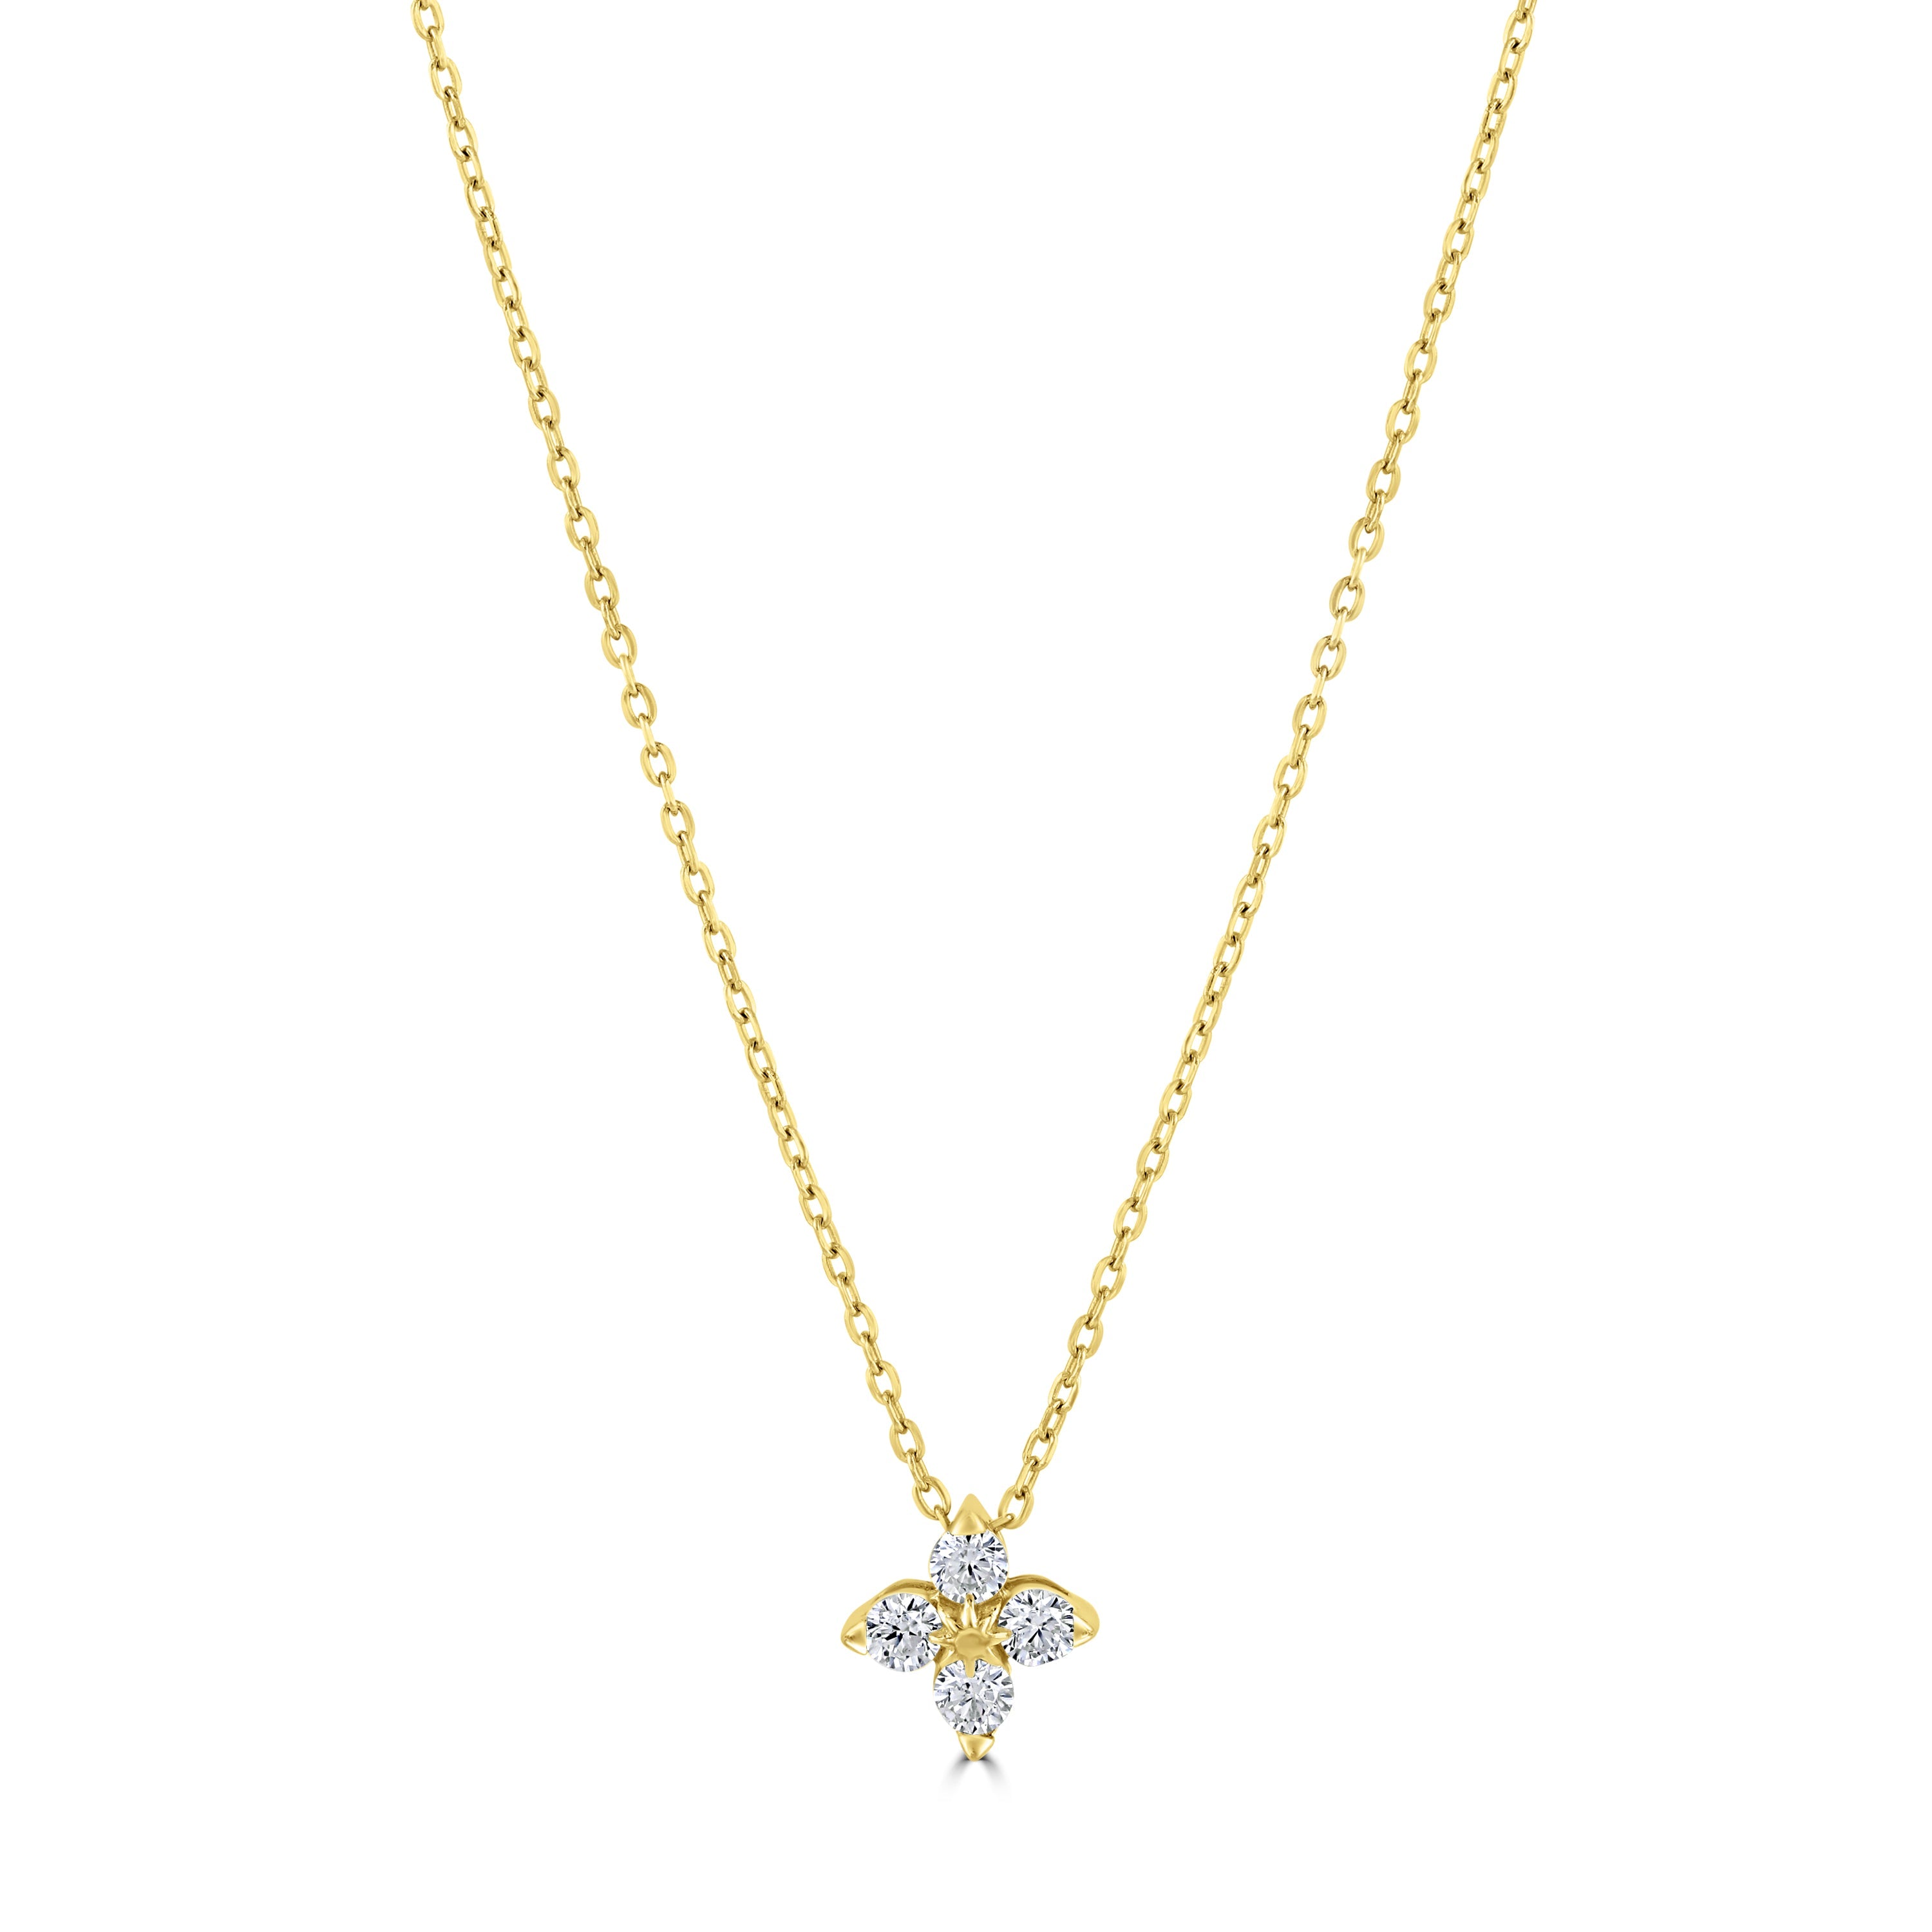 CHLOE // Gold dainty gold floral necklace